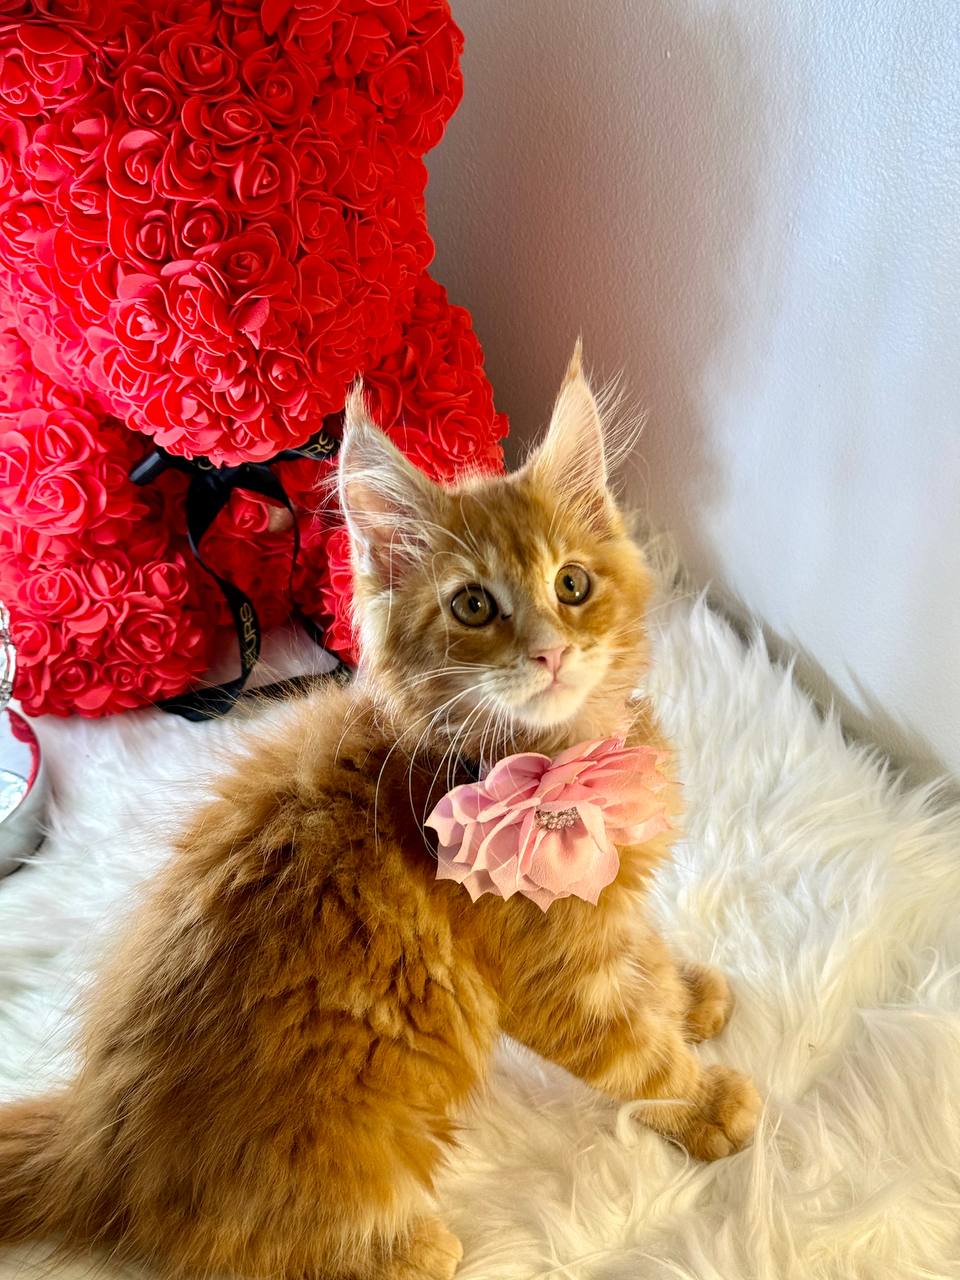 Dior – super sweet and cuddly red marble Maincoon female, dob 03/13/24